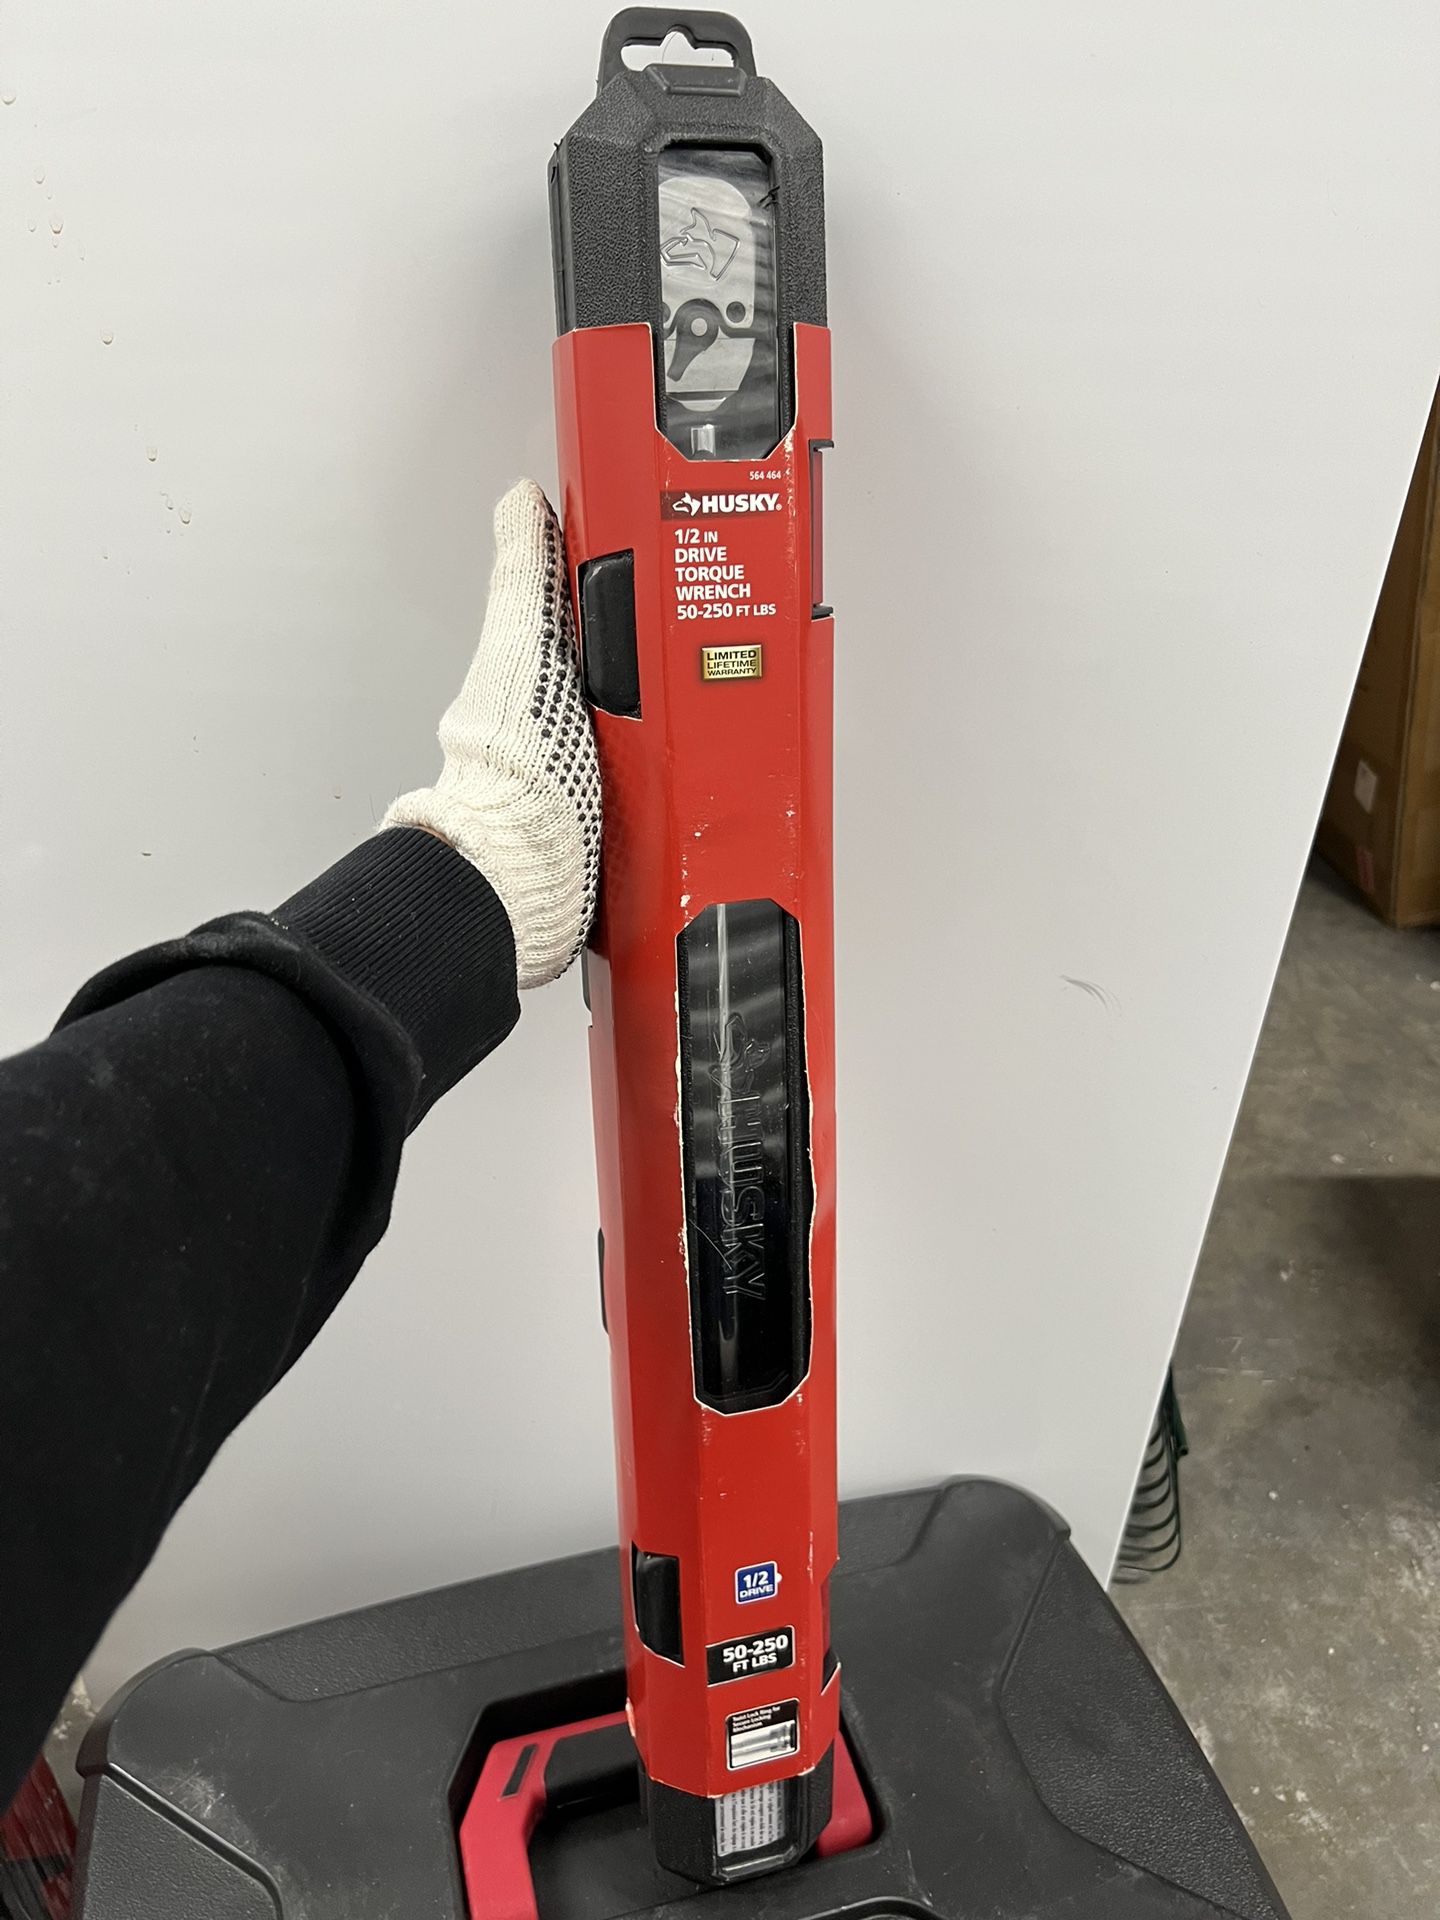 HUSKY 1/2 IN DRIVE TORQUE WRENCH 50-250 FT LBS.